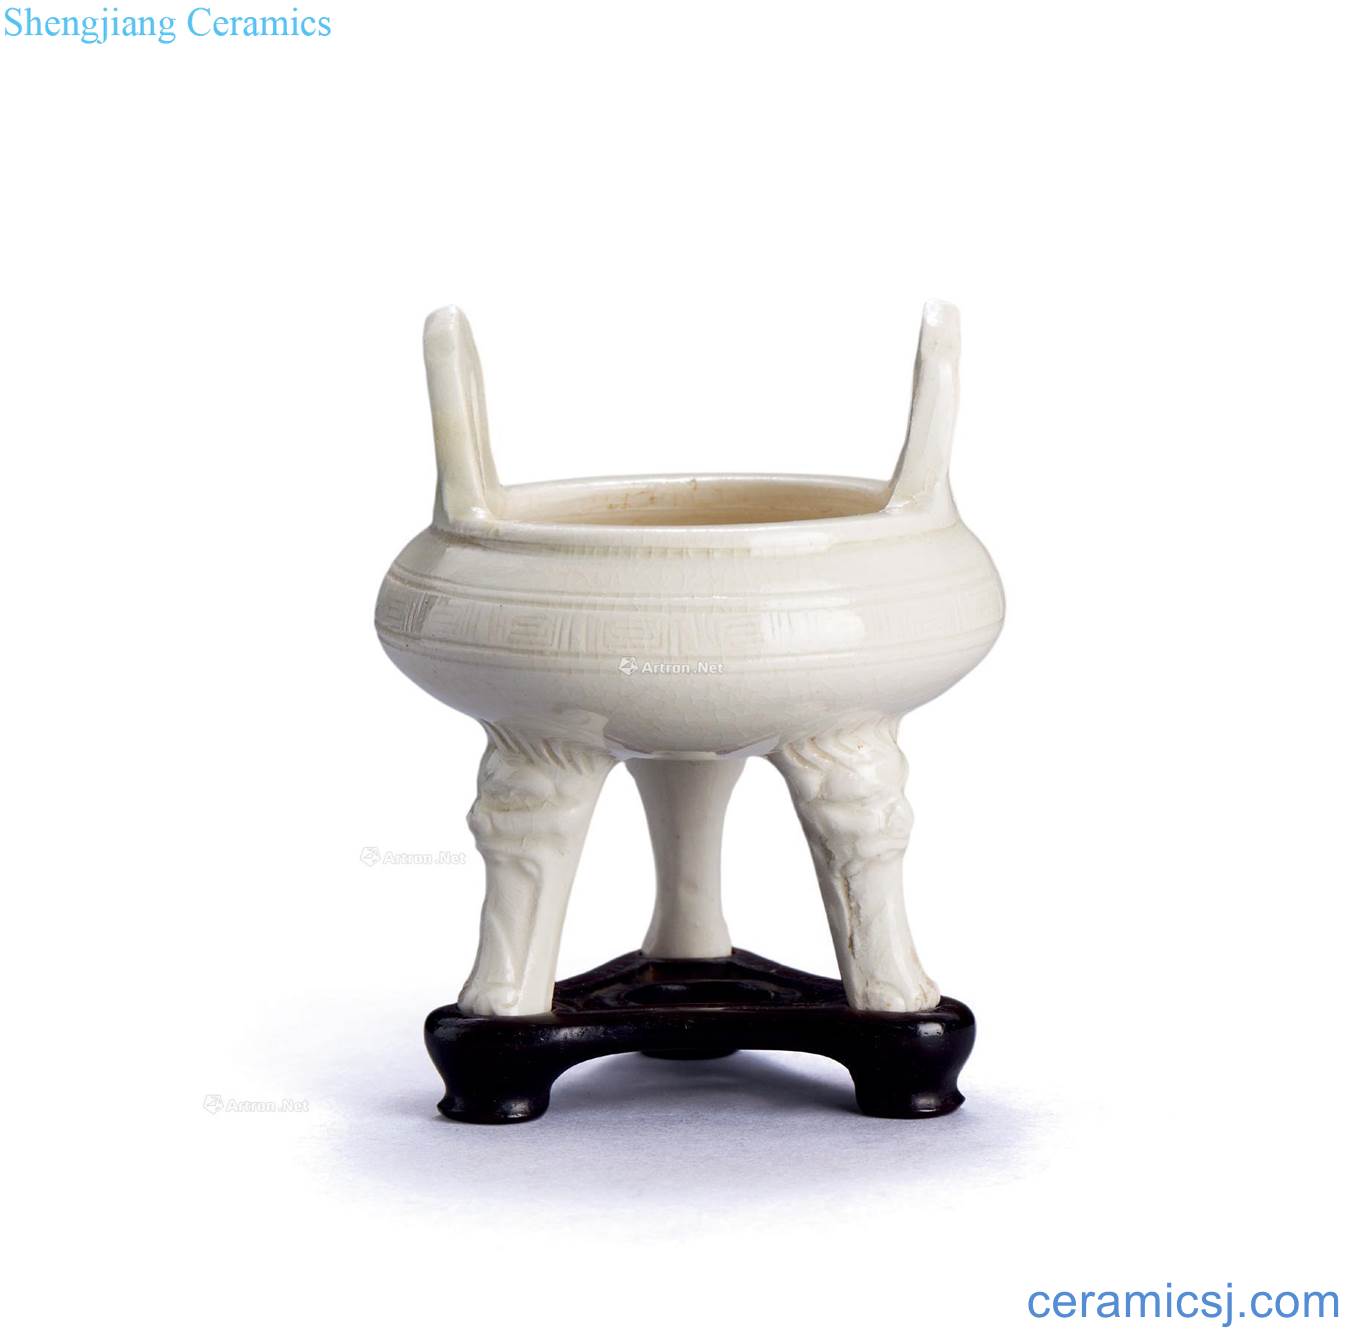 Ming White porcelain incense burner with three legs